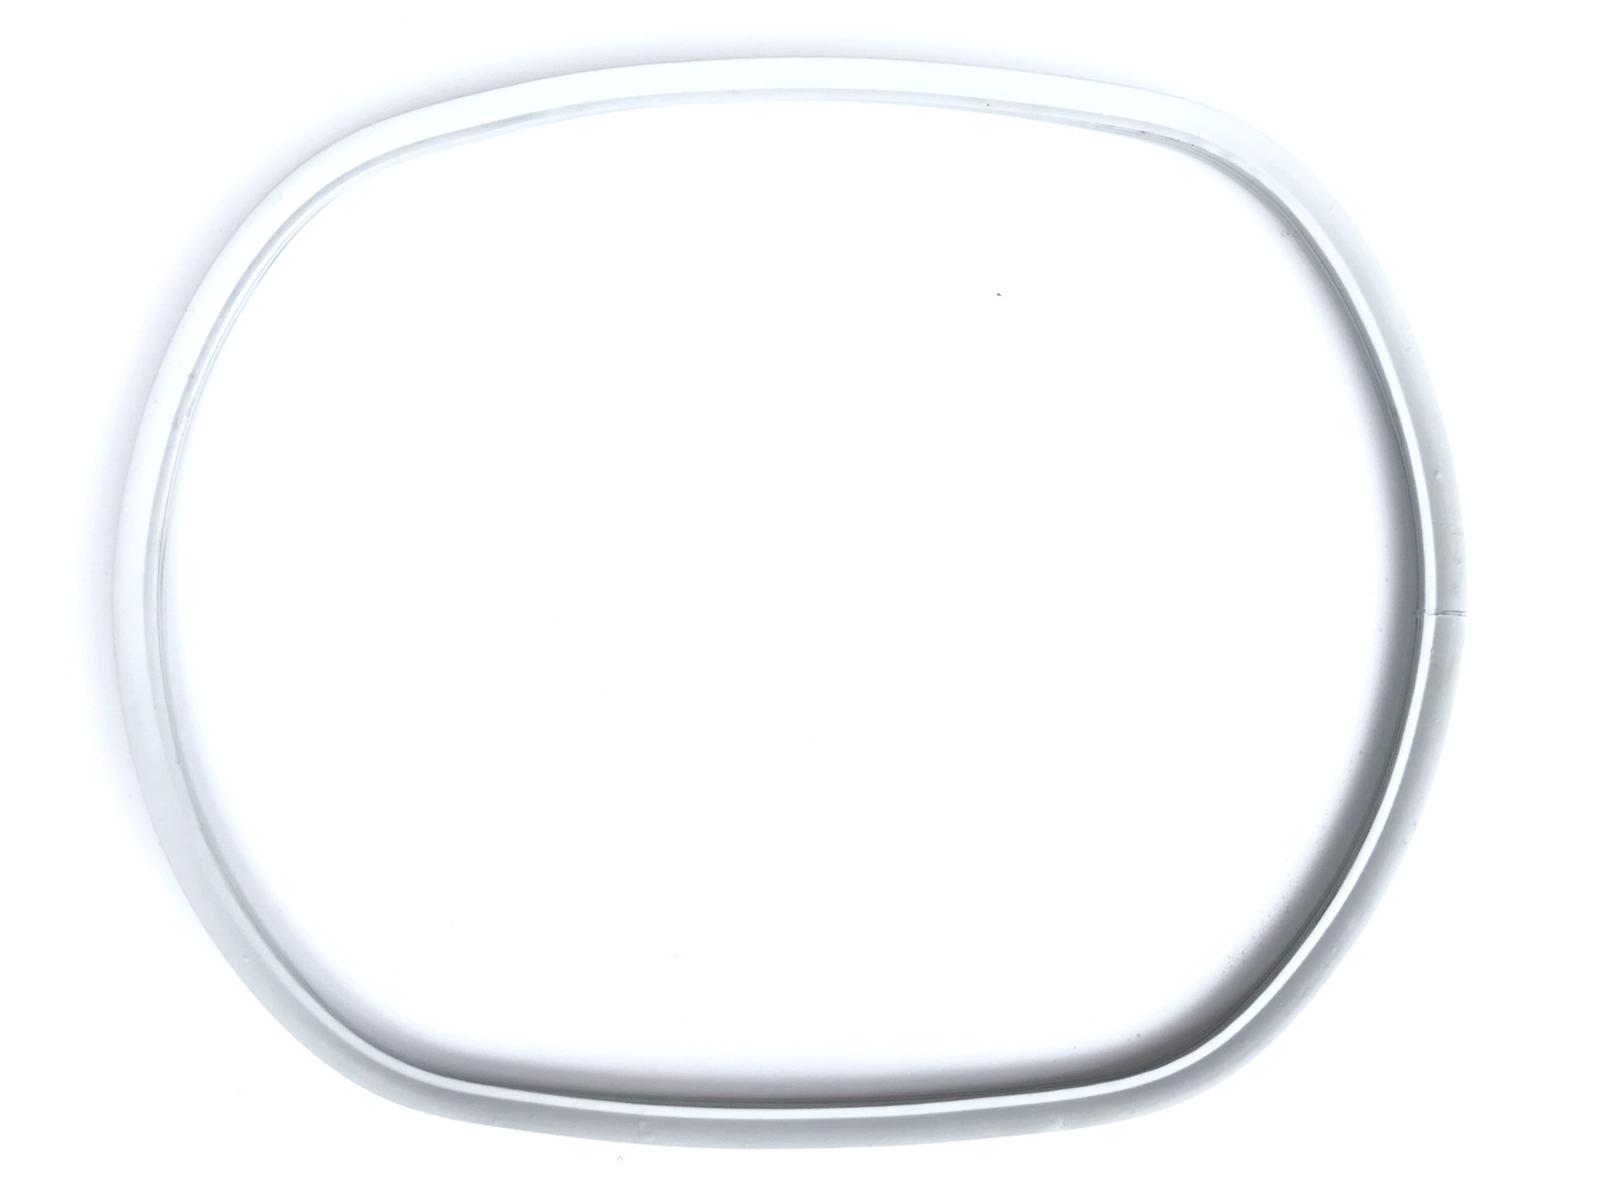 Door Gasket For Hoover DX H9A2TCEX-S Dryer Machine 40005393